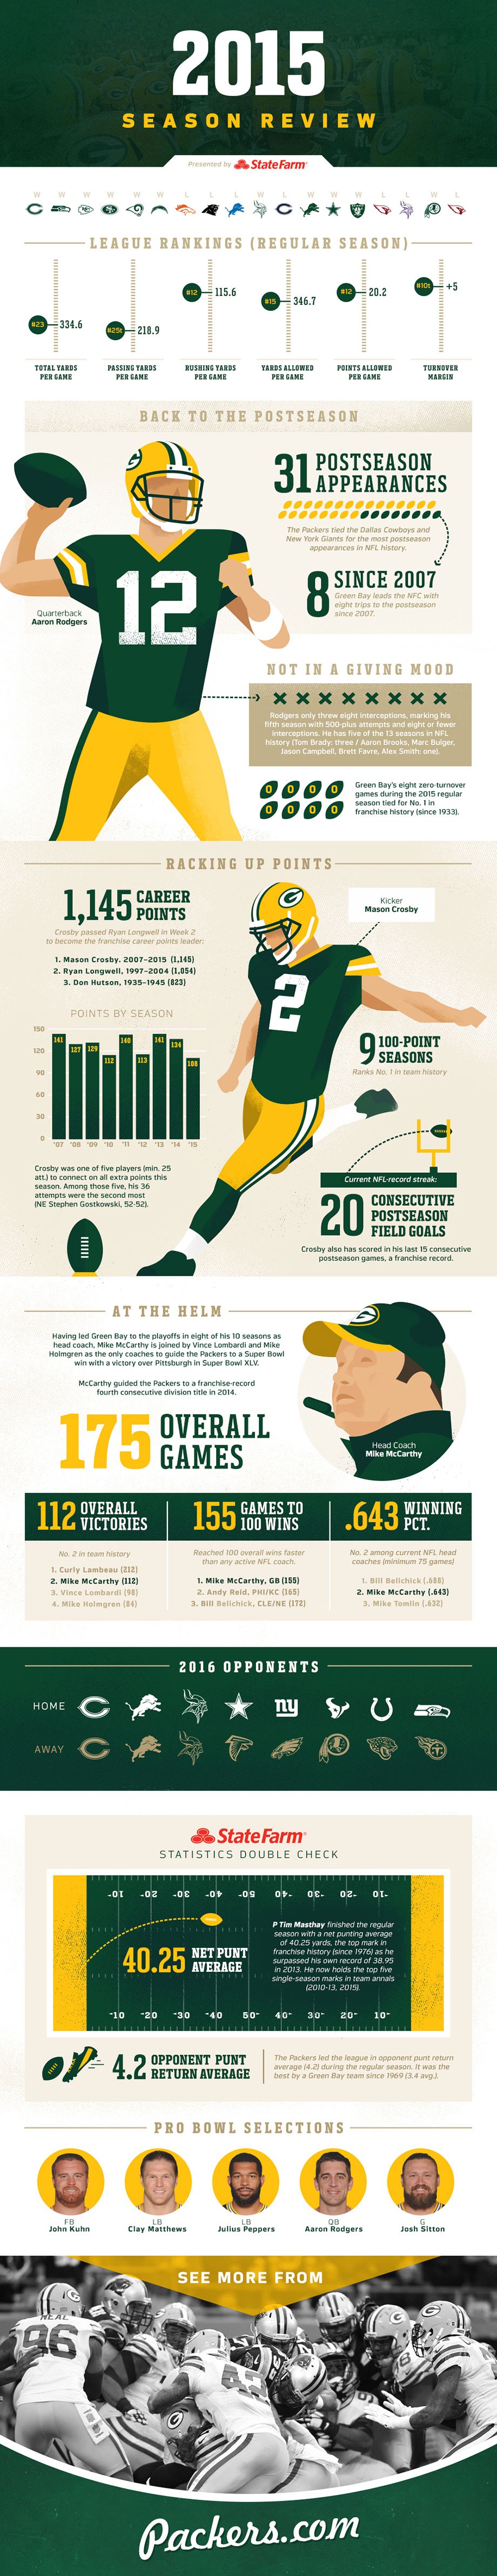 Infographic Packers season in review